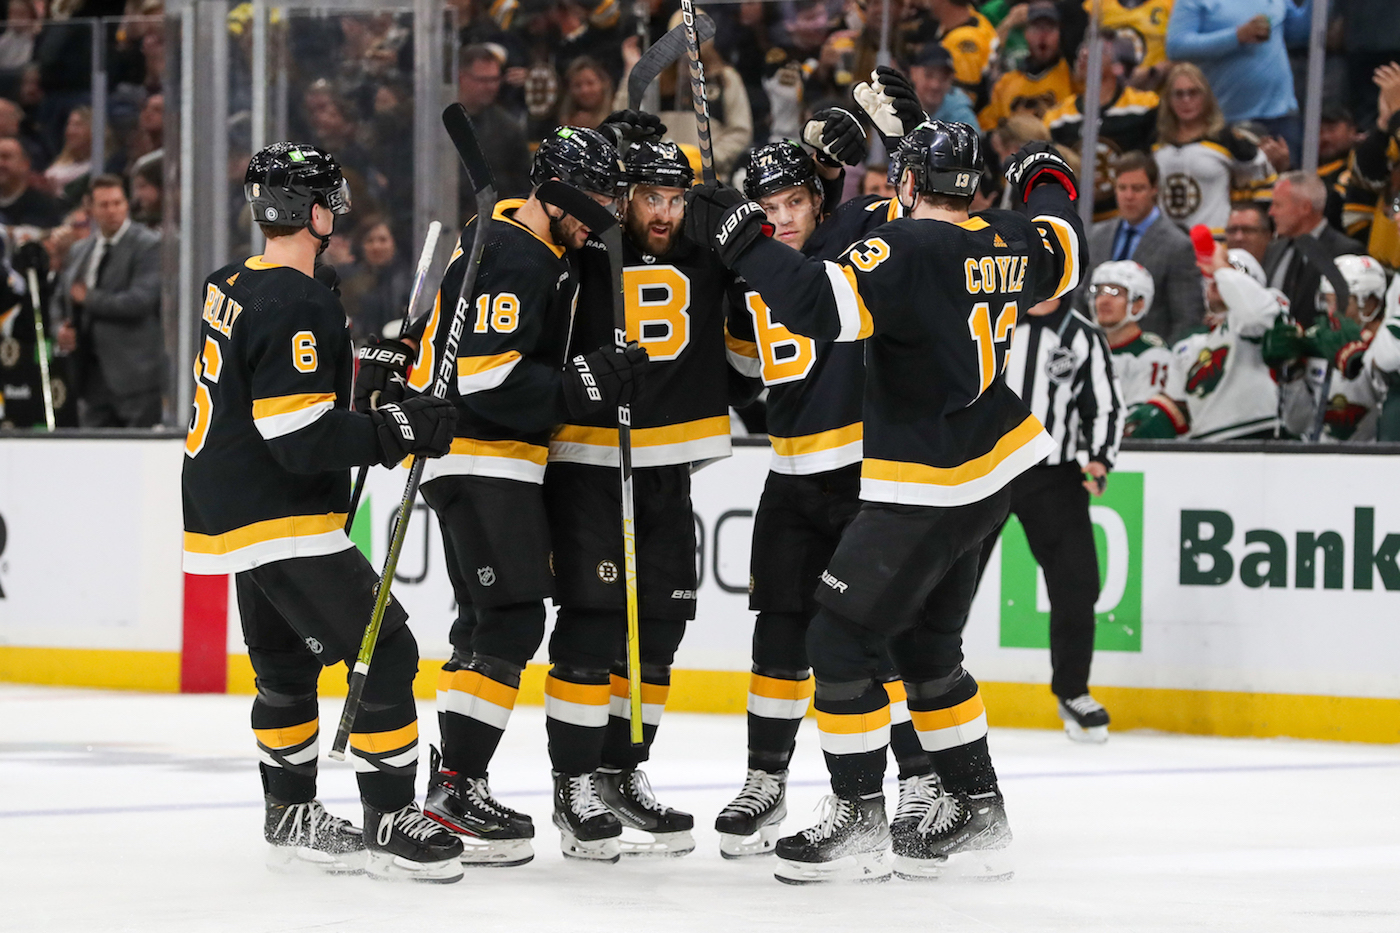 Oct 22, 2022; Boston, Massachusetts, USA; Boston Bruins left wing Nick Foligno (17) celebrates with teammates after scoring during the first period against the Minnesota Wild at TD Garden. Mandatory Credit: Paul Rutherford/USA TODAY Sports